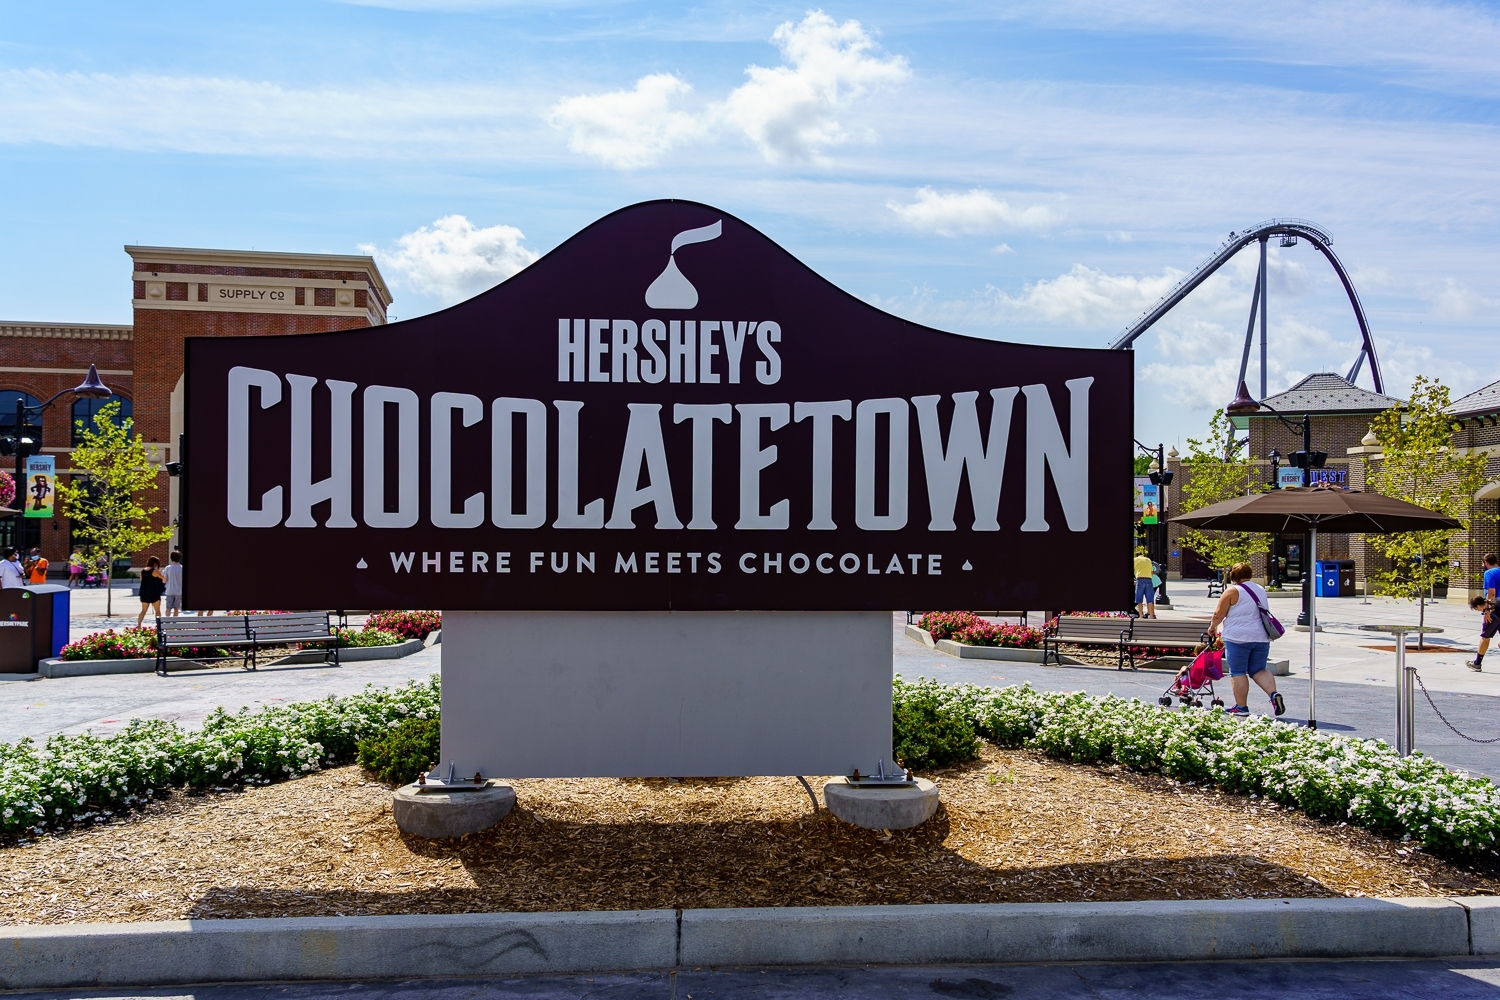 Hershey, PA, USA - September 4, 2020: The Hershey’s Chosoactetown sign located at the entrance of Hersheypark.